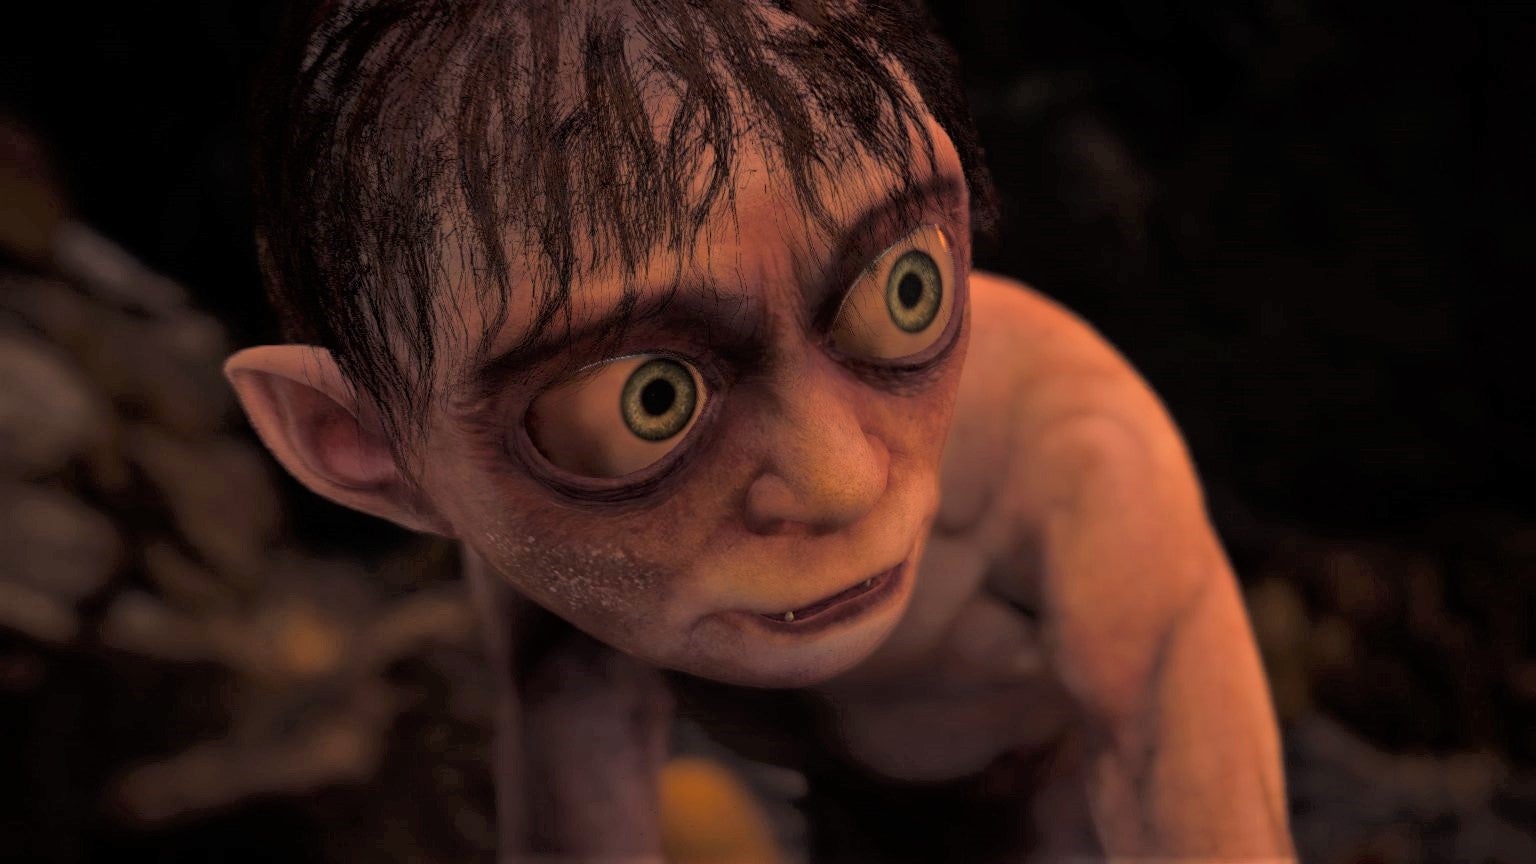 Lord of the Rings: Gollum devs describe alleged hostile work culture